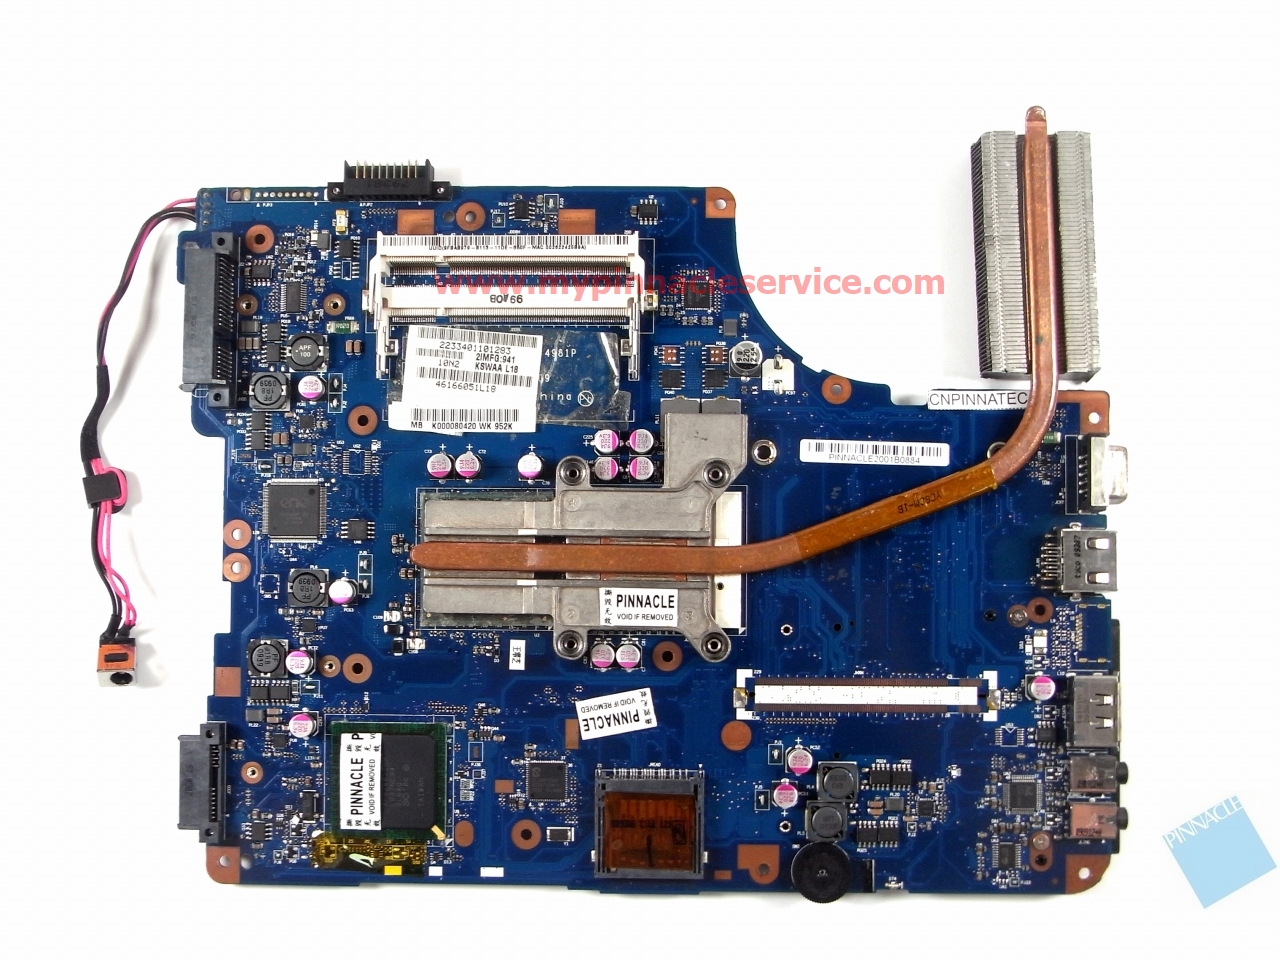 k000080420-motherboard-with-heatsink-and-cpu-for-toshiba-satellite-l500-la-4981p-instead-of-l500d-k000087420-k000084360-la-5332p-la-4971p-rimg0049.jpg